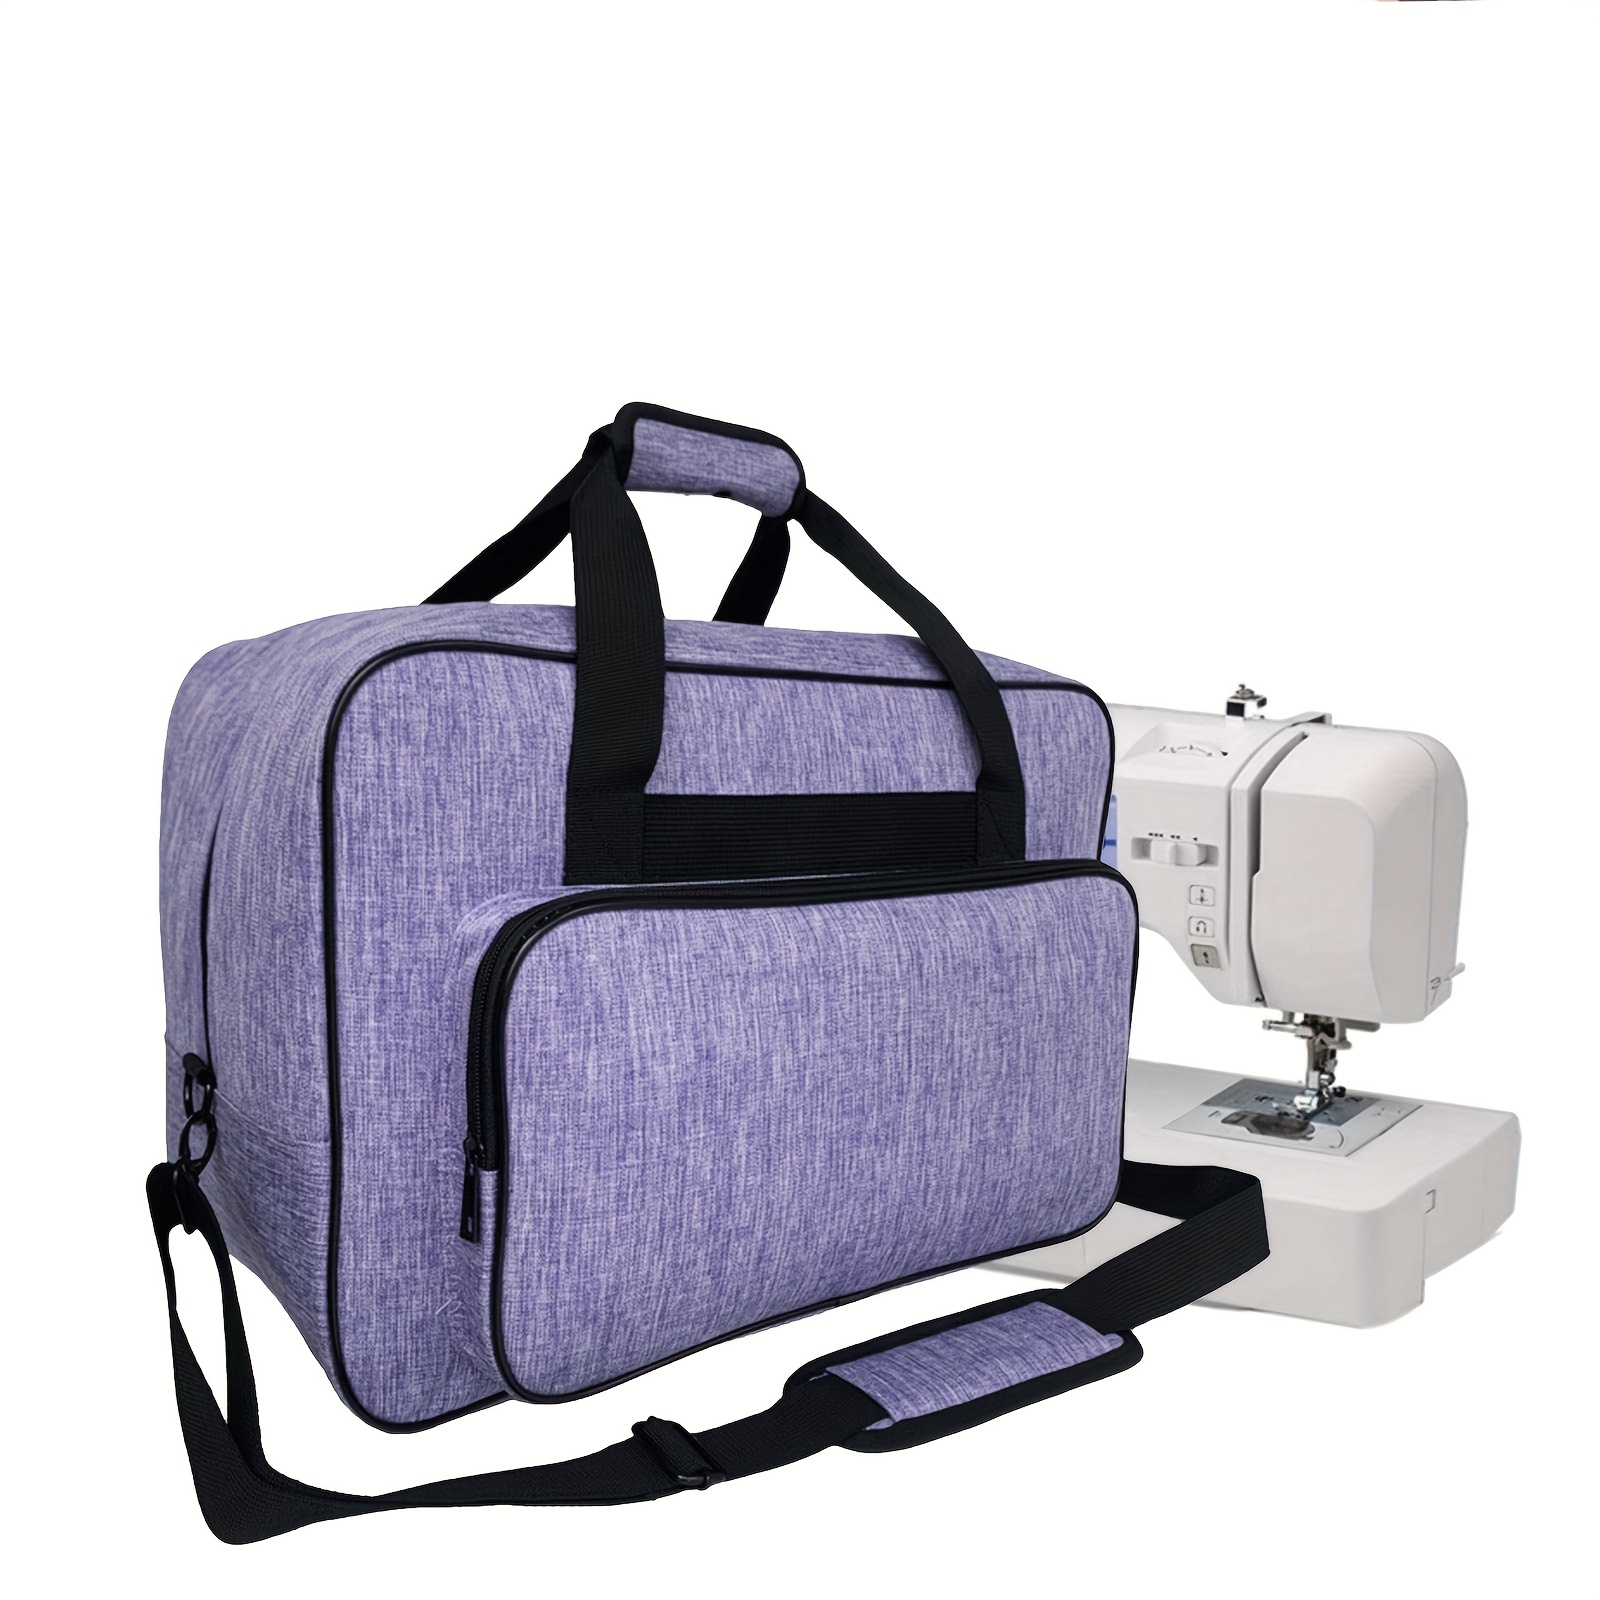 Sewing Machine Dust Cover Storage Cover for Most Basic Standard Machines  Purple Sewing Accessories Fabric 